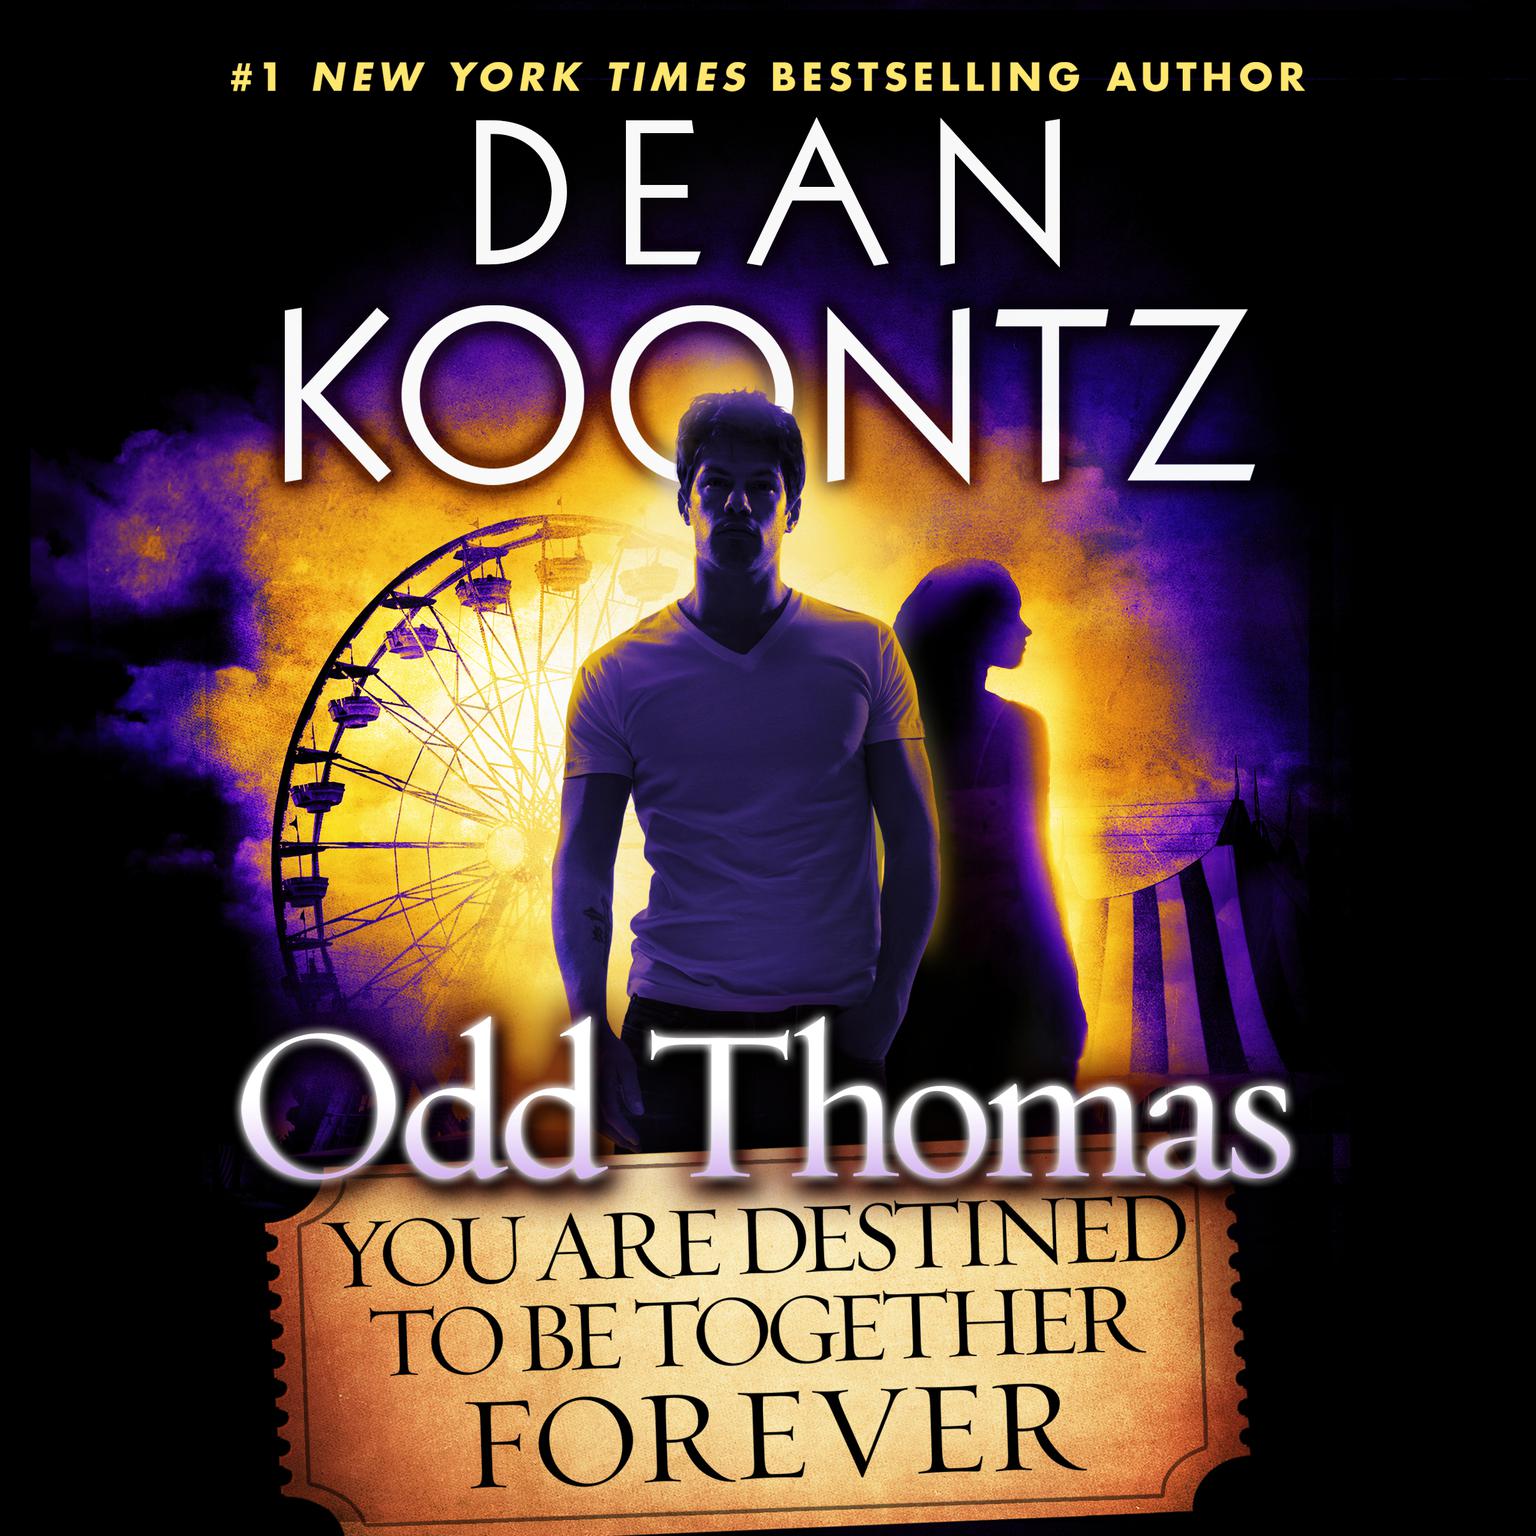 Odd Thomas: You Are Destined to Be Together Forever Audiobook, by Dean Koontz